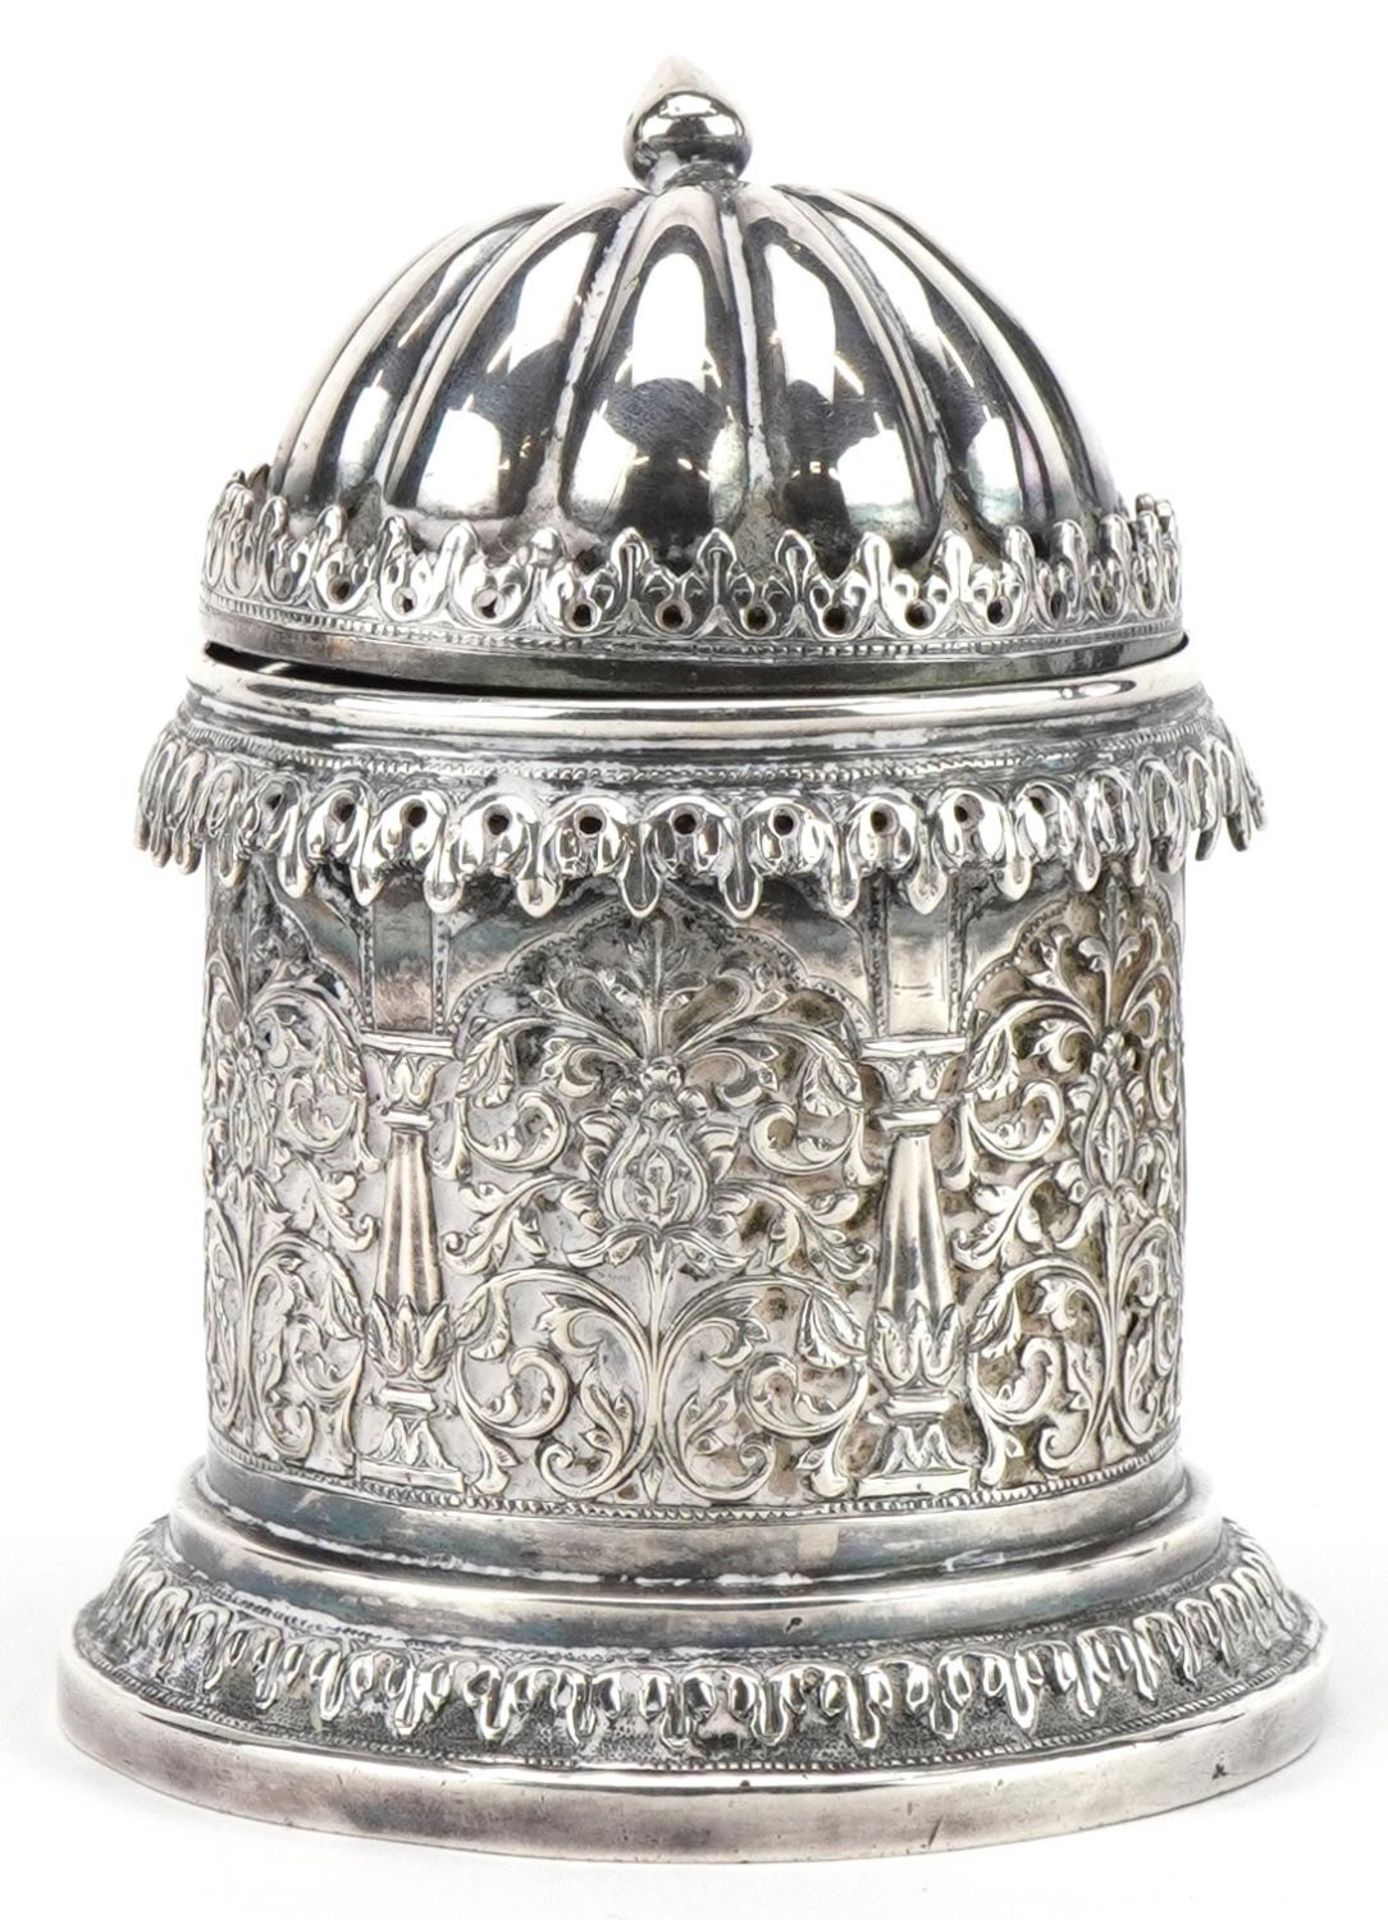 Bhuj, Indian Kutch silver cylindrical pot with hinged lid profusely pierced and embossed with